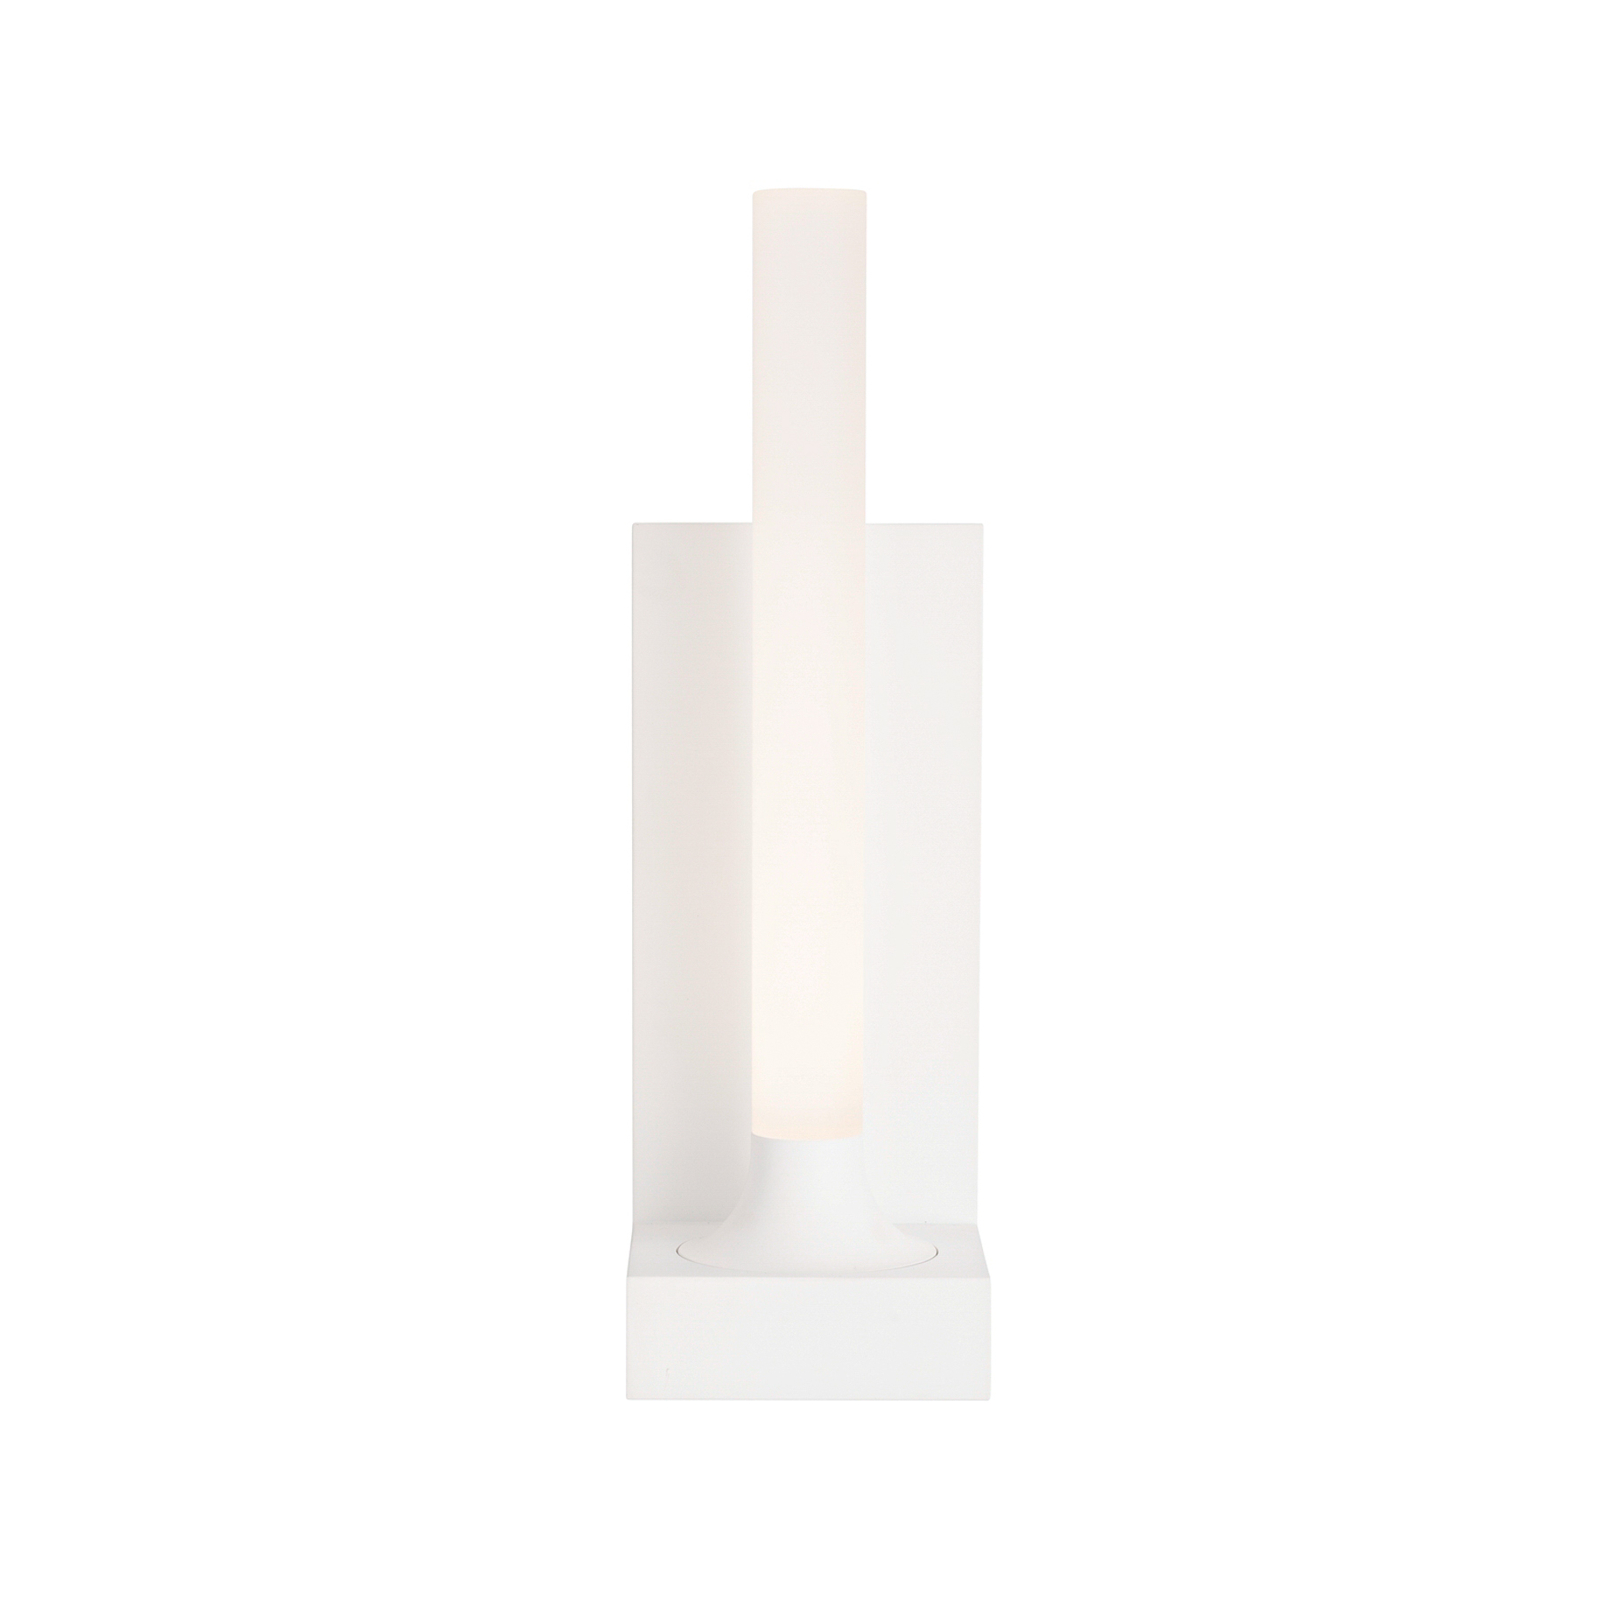 Kartell Goodnight applique LED, blanche